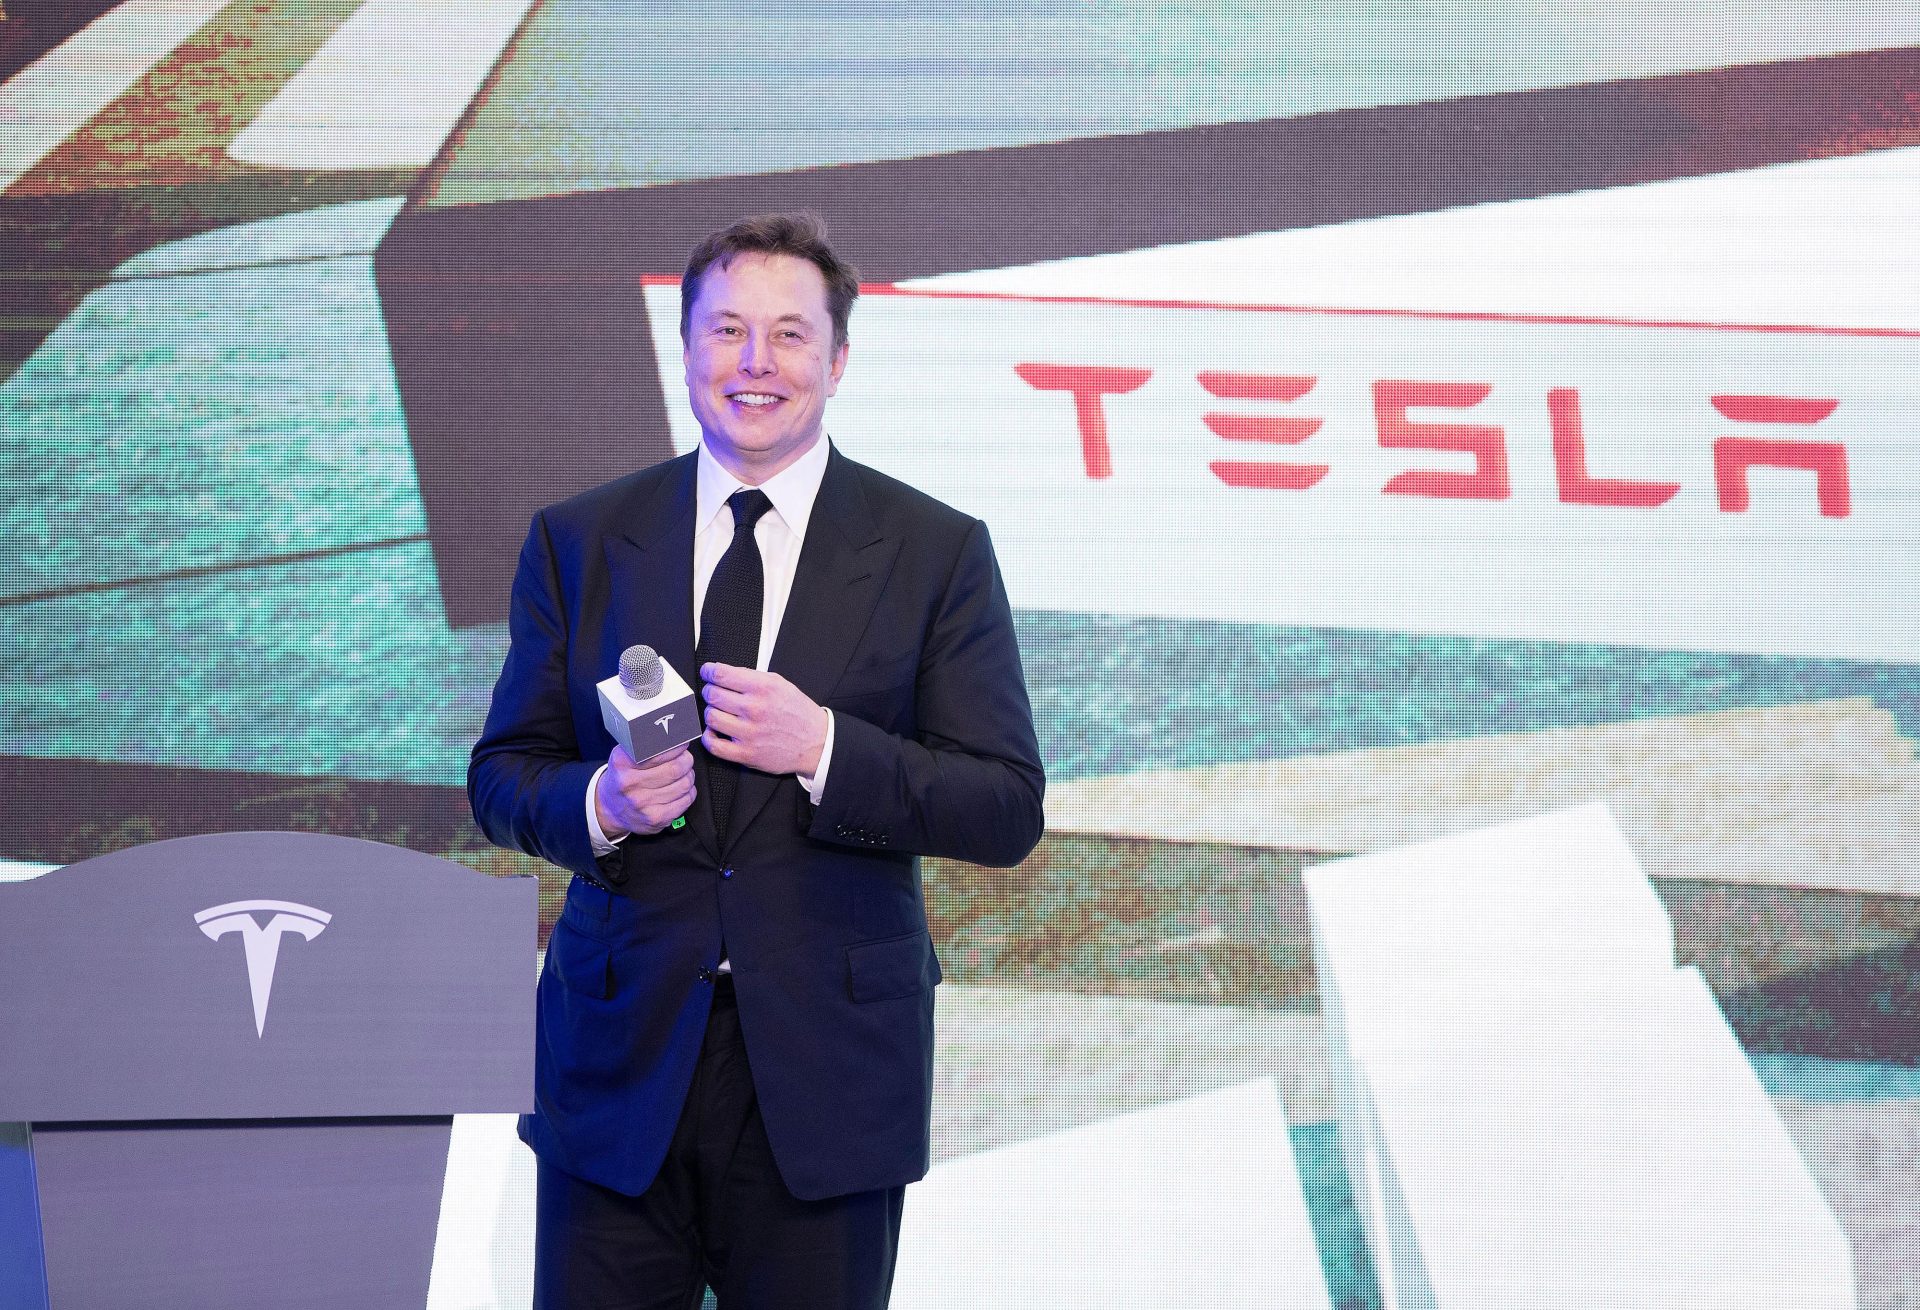 Tesla stock closes at an all-time high on bullish sales data out of China